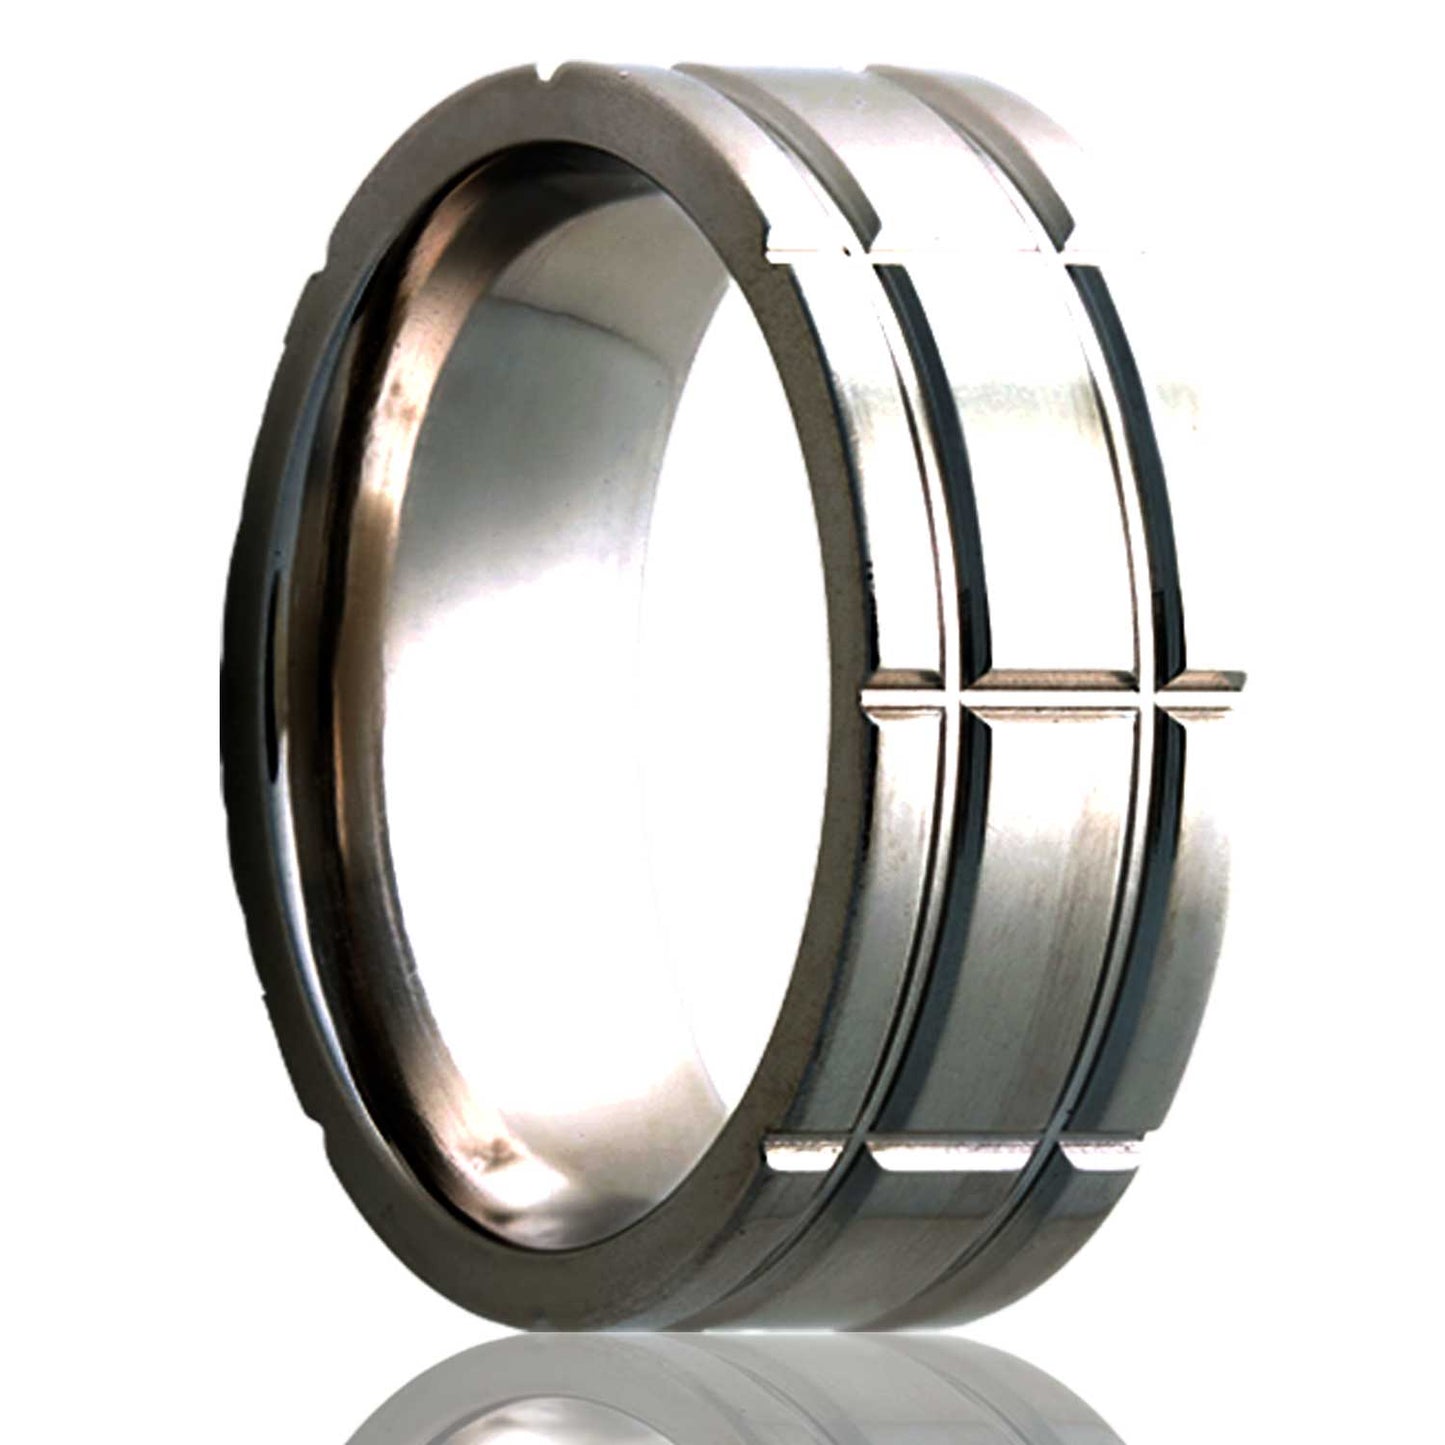 A intersecting groove pattern titanium wedding band displayed on a neutral white background.